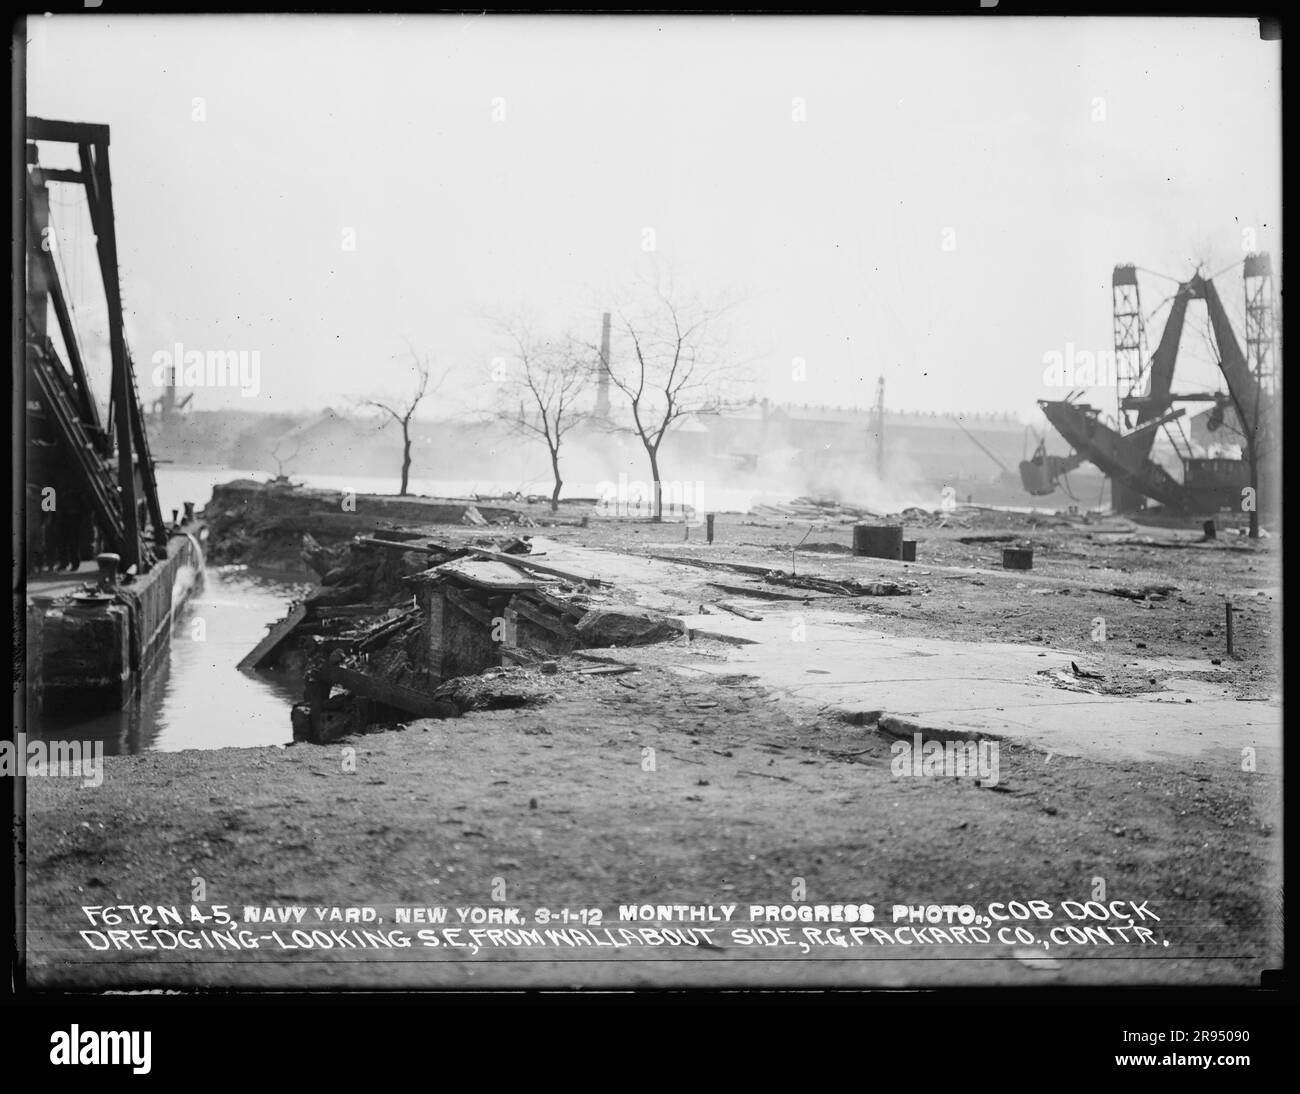 Monthly Progress Photo, Cob Dock Dredging, Looking Southeast, from Wallabout Side, R. G. Packard Company, Contractor. Glass Plate Negatives of the Construction and Repair of Buildings, Facilities, and Vessels at the New York Navy Yard. Stock Photo